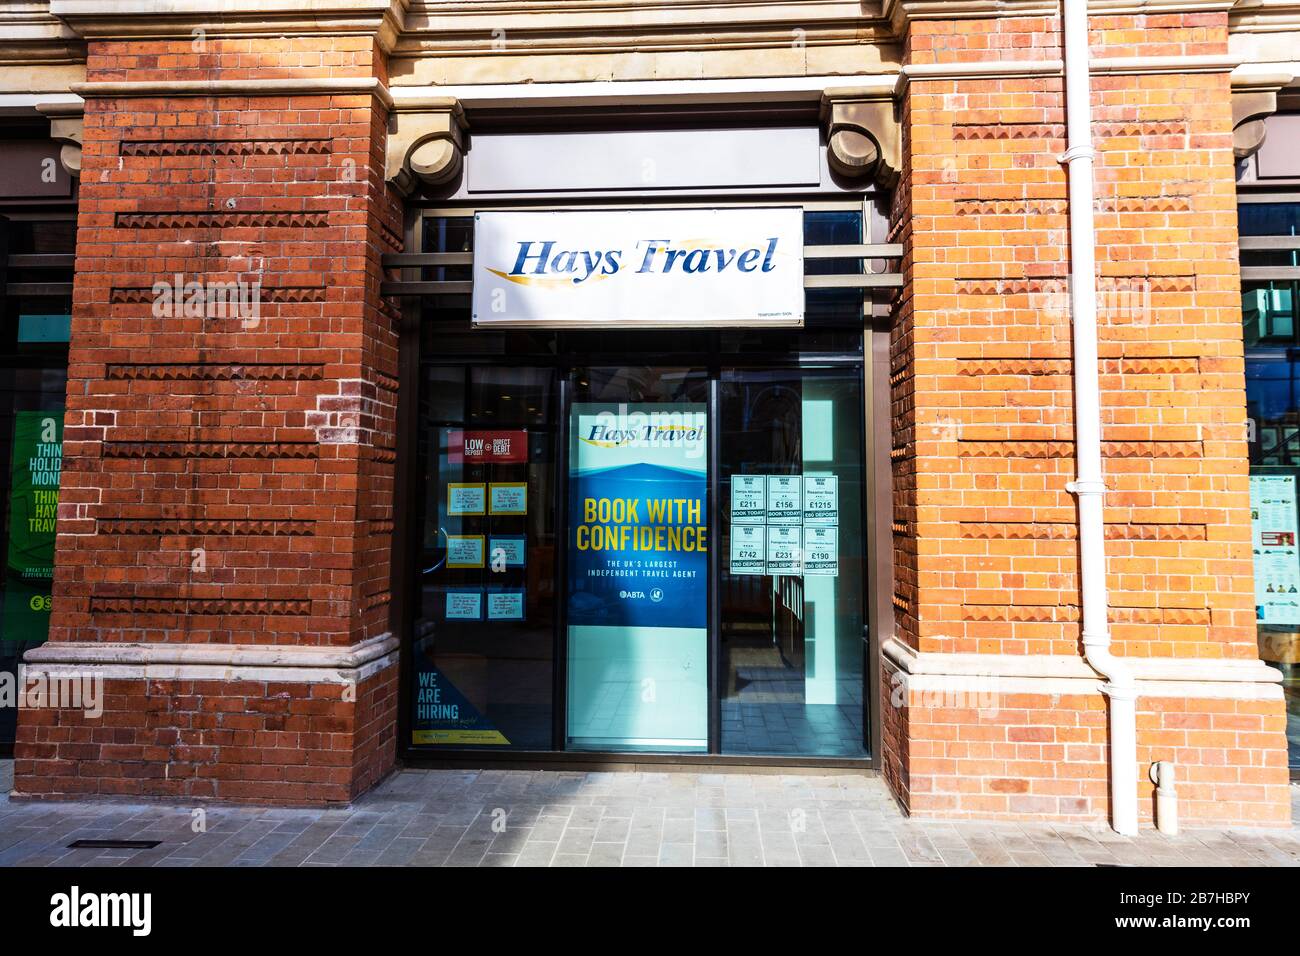 Hays Travel, Lincoln City Lincolnshire UK England, Hays Travel shop, Hays Travel logo, Hays Travel sign, Hays Travel agents, Hays Travel store, Stock Photo